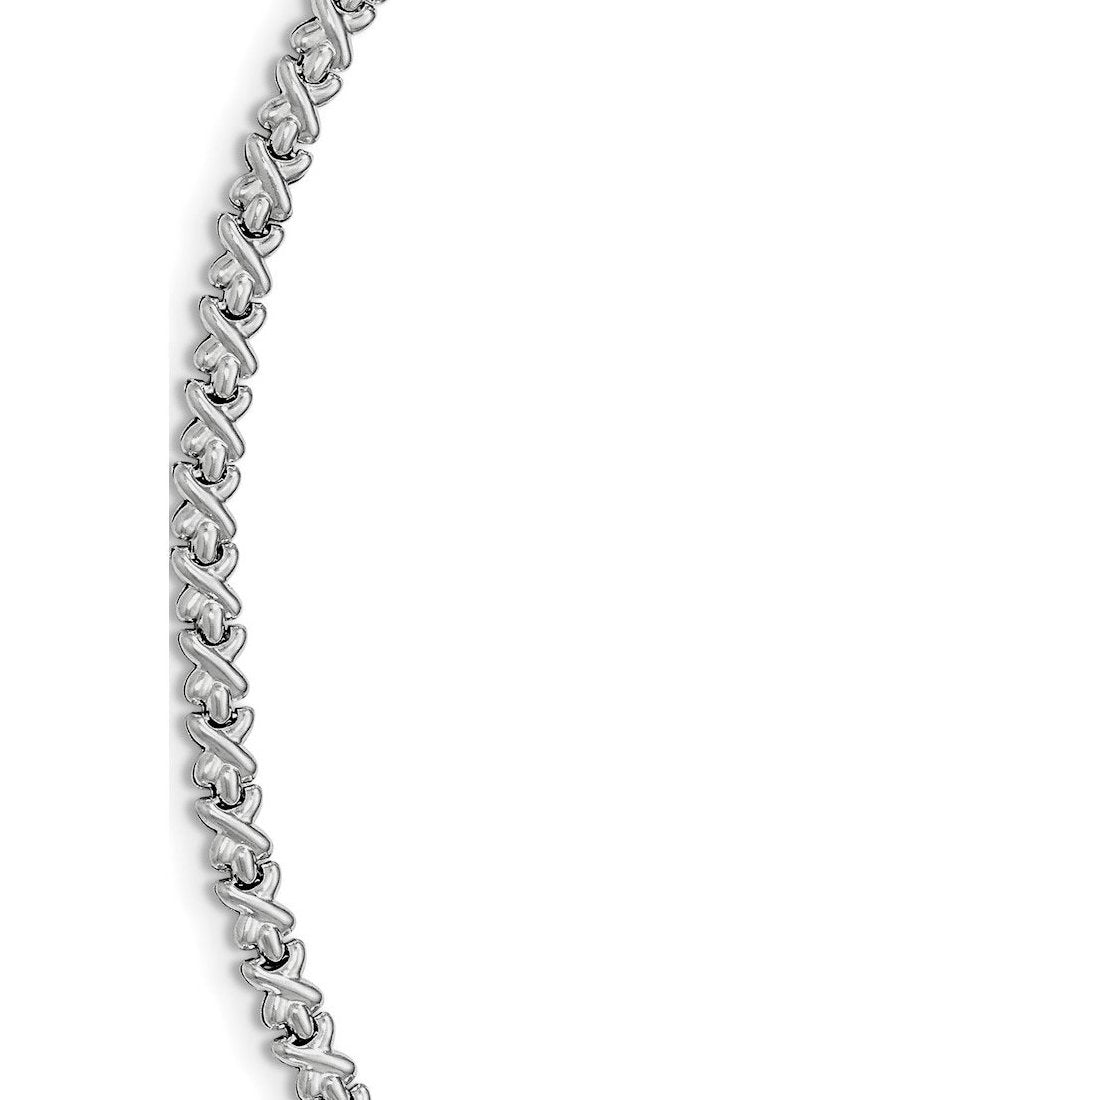 1.4MM Criss Cross Chain .925 Solid Sterling Silver Available In "16-20"